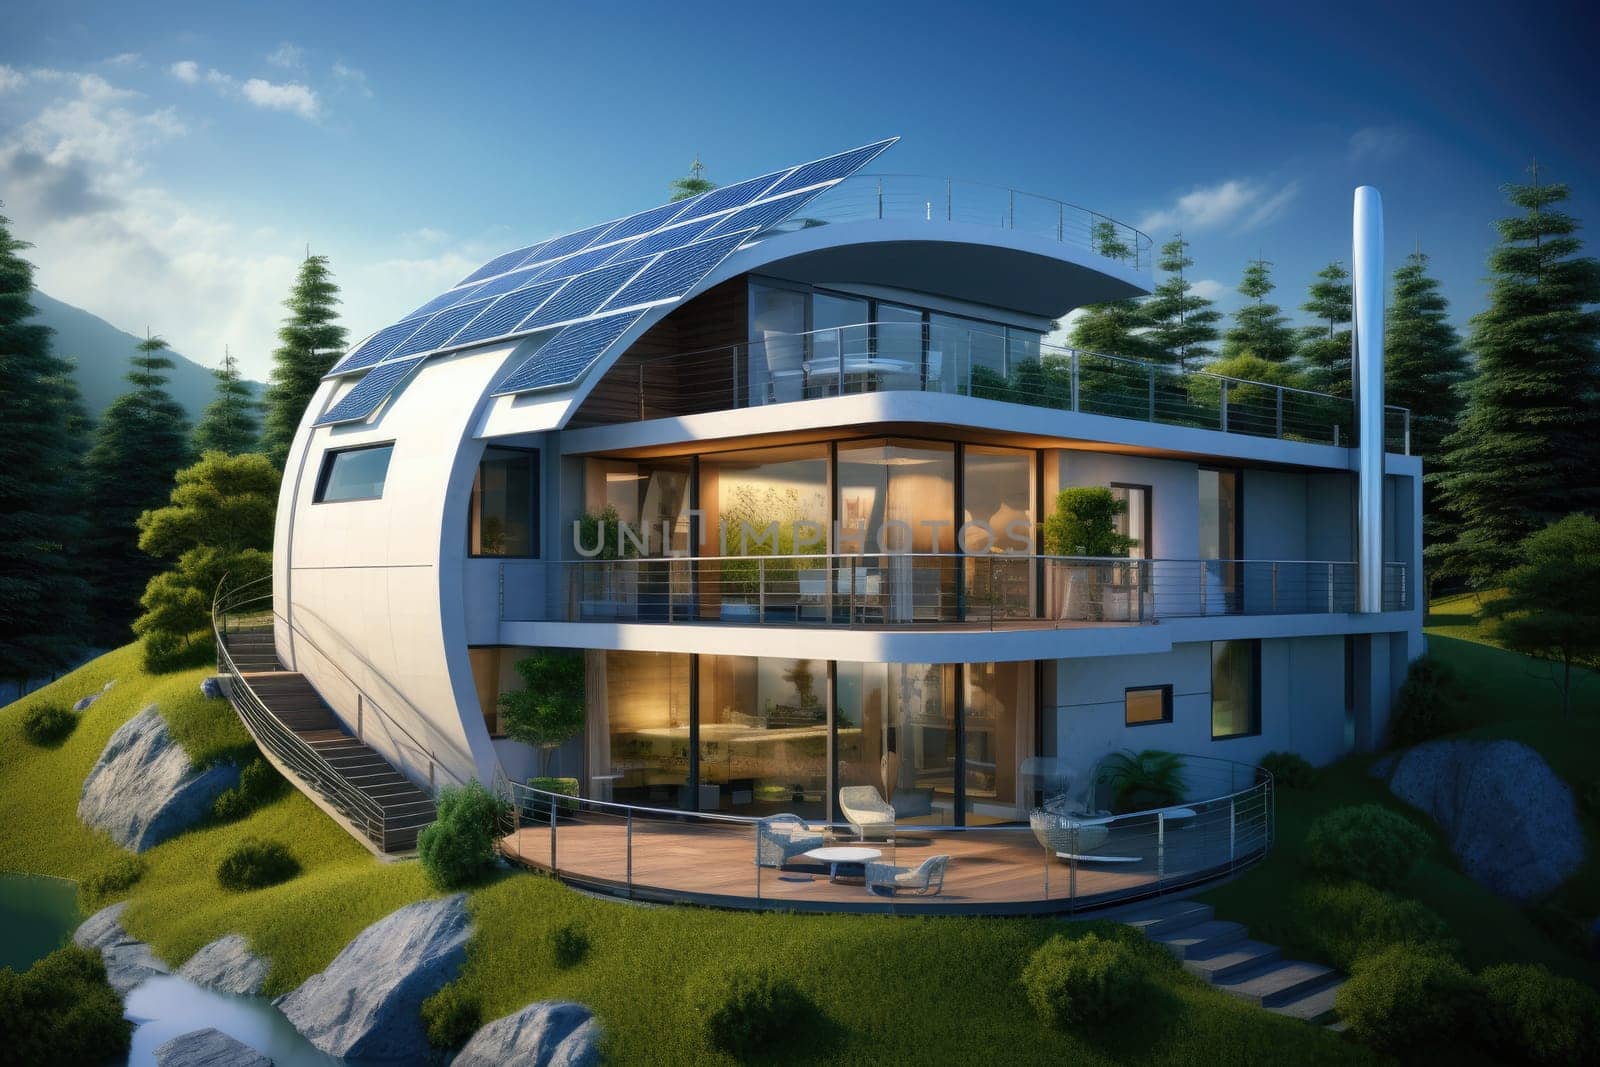 Ecological house or green building building surrounded by nature, with solar panels or wind turbines by Yurich32